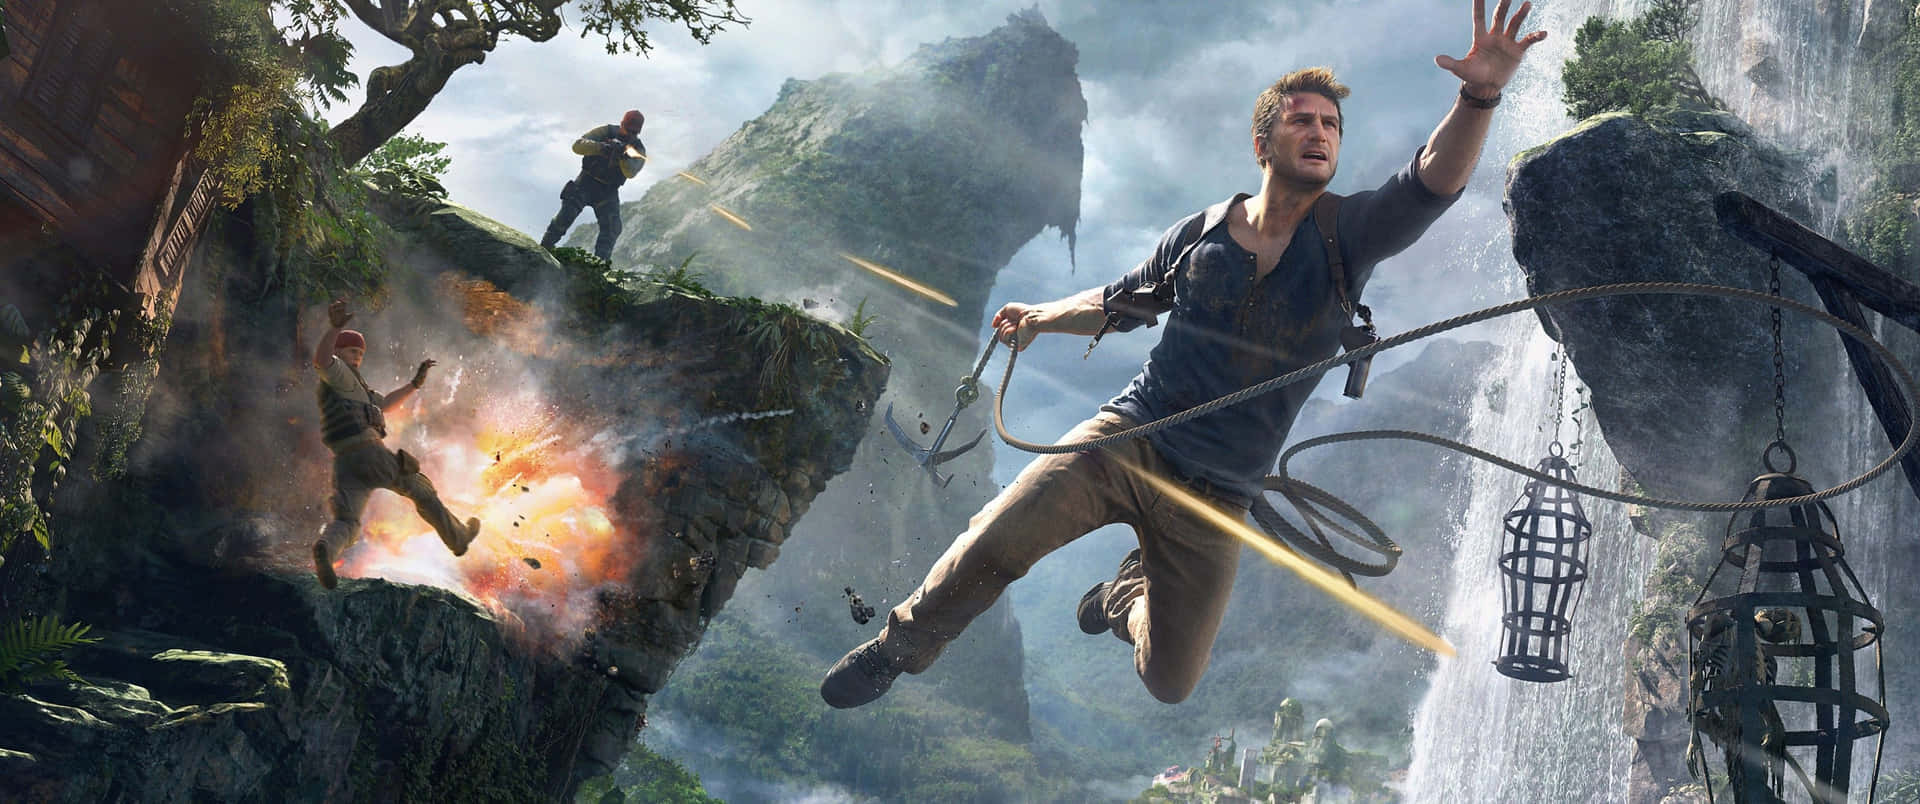 3440x1440spiel Uncharted 4: A Thief's End Wallpaper